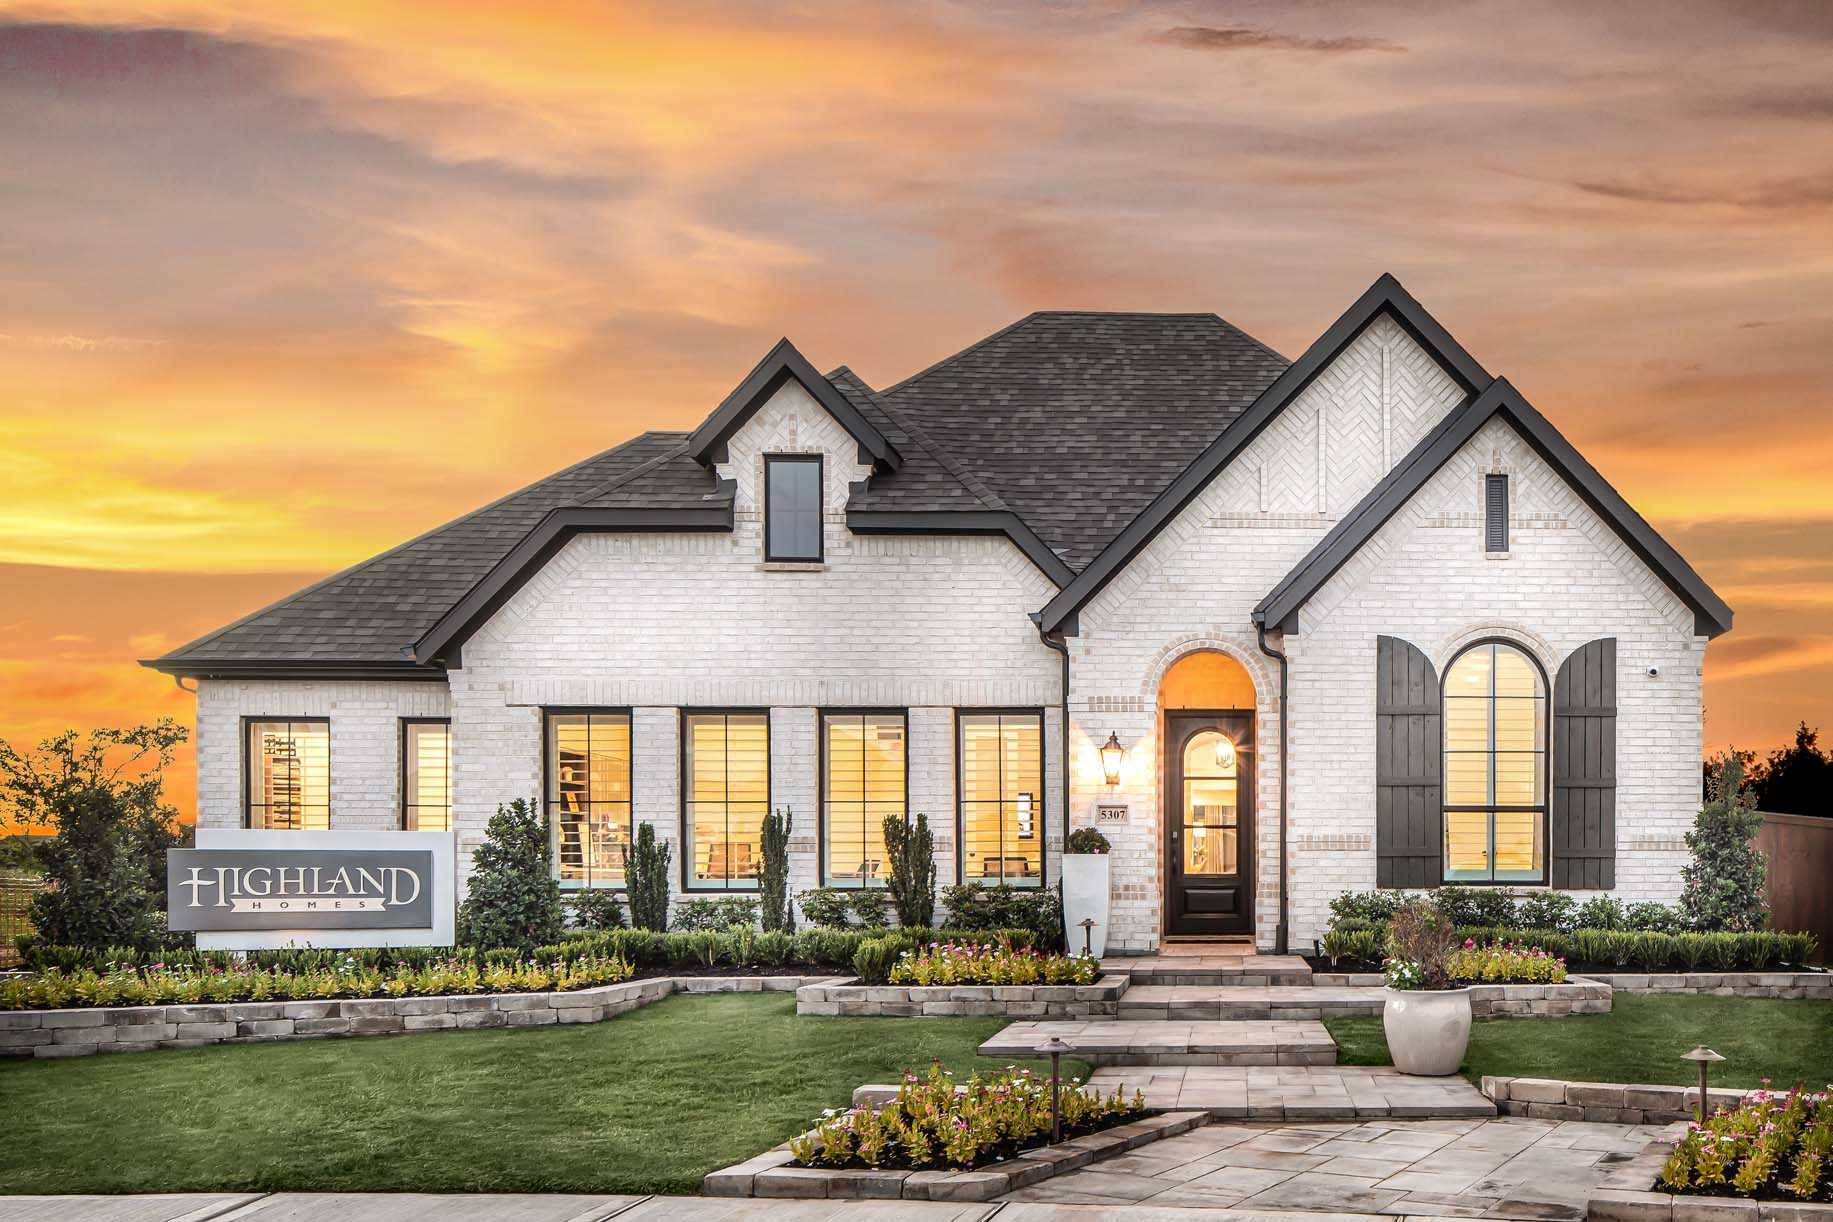 Elegant new home in New Braunfels with manicured lawn at sunset.